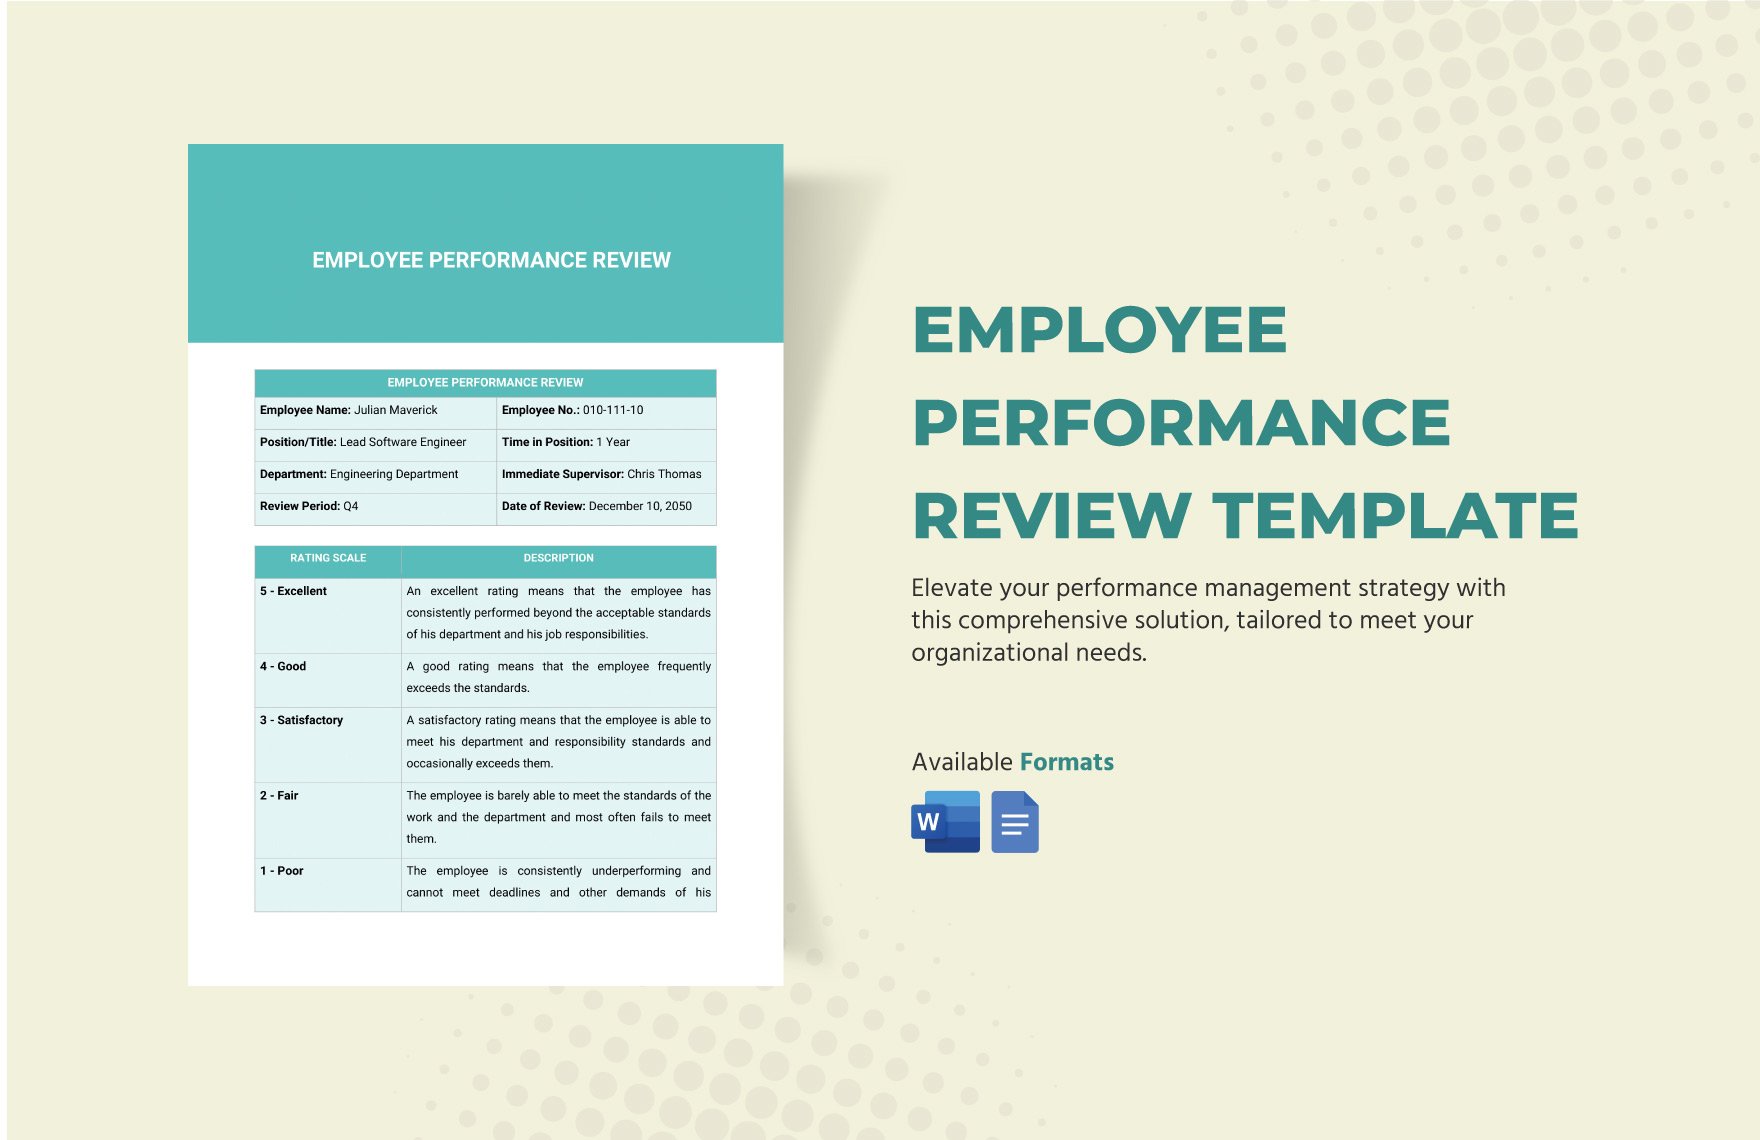 Employee Performance Review Template in Word, Google Docs